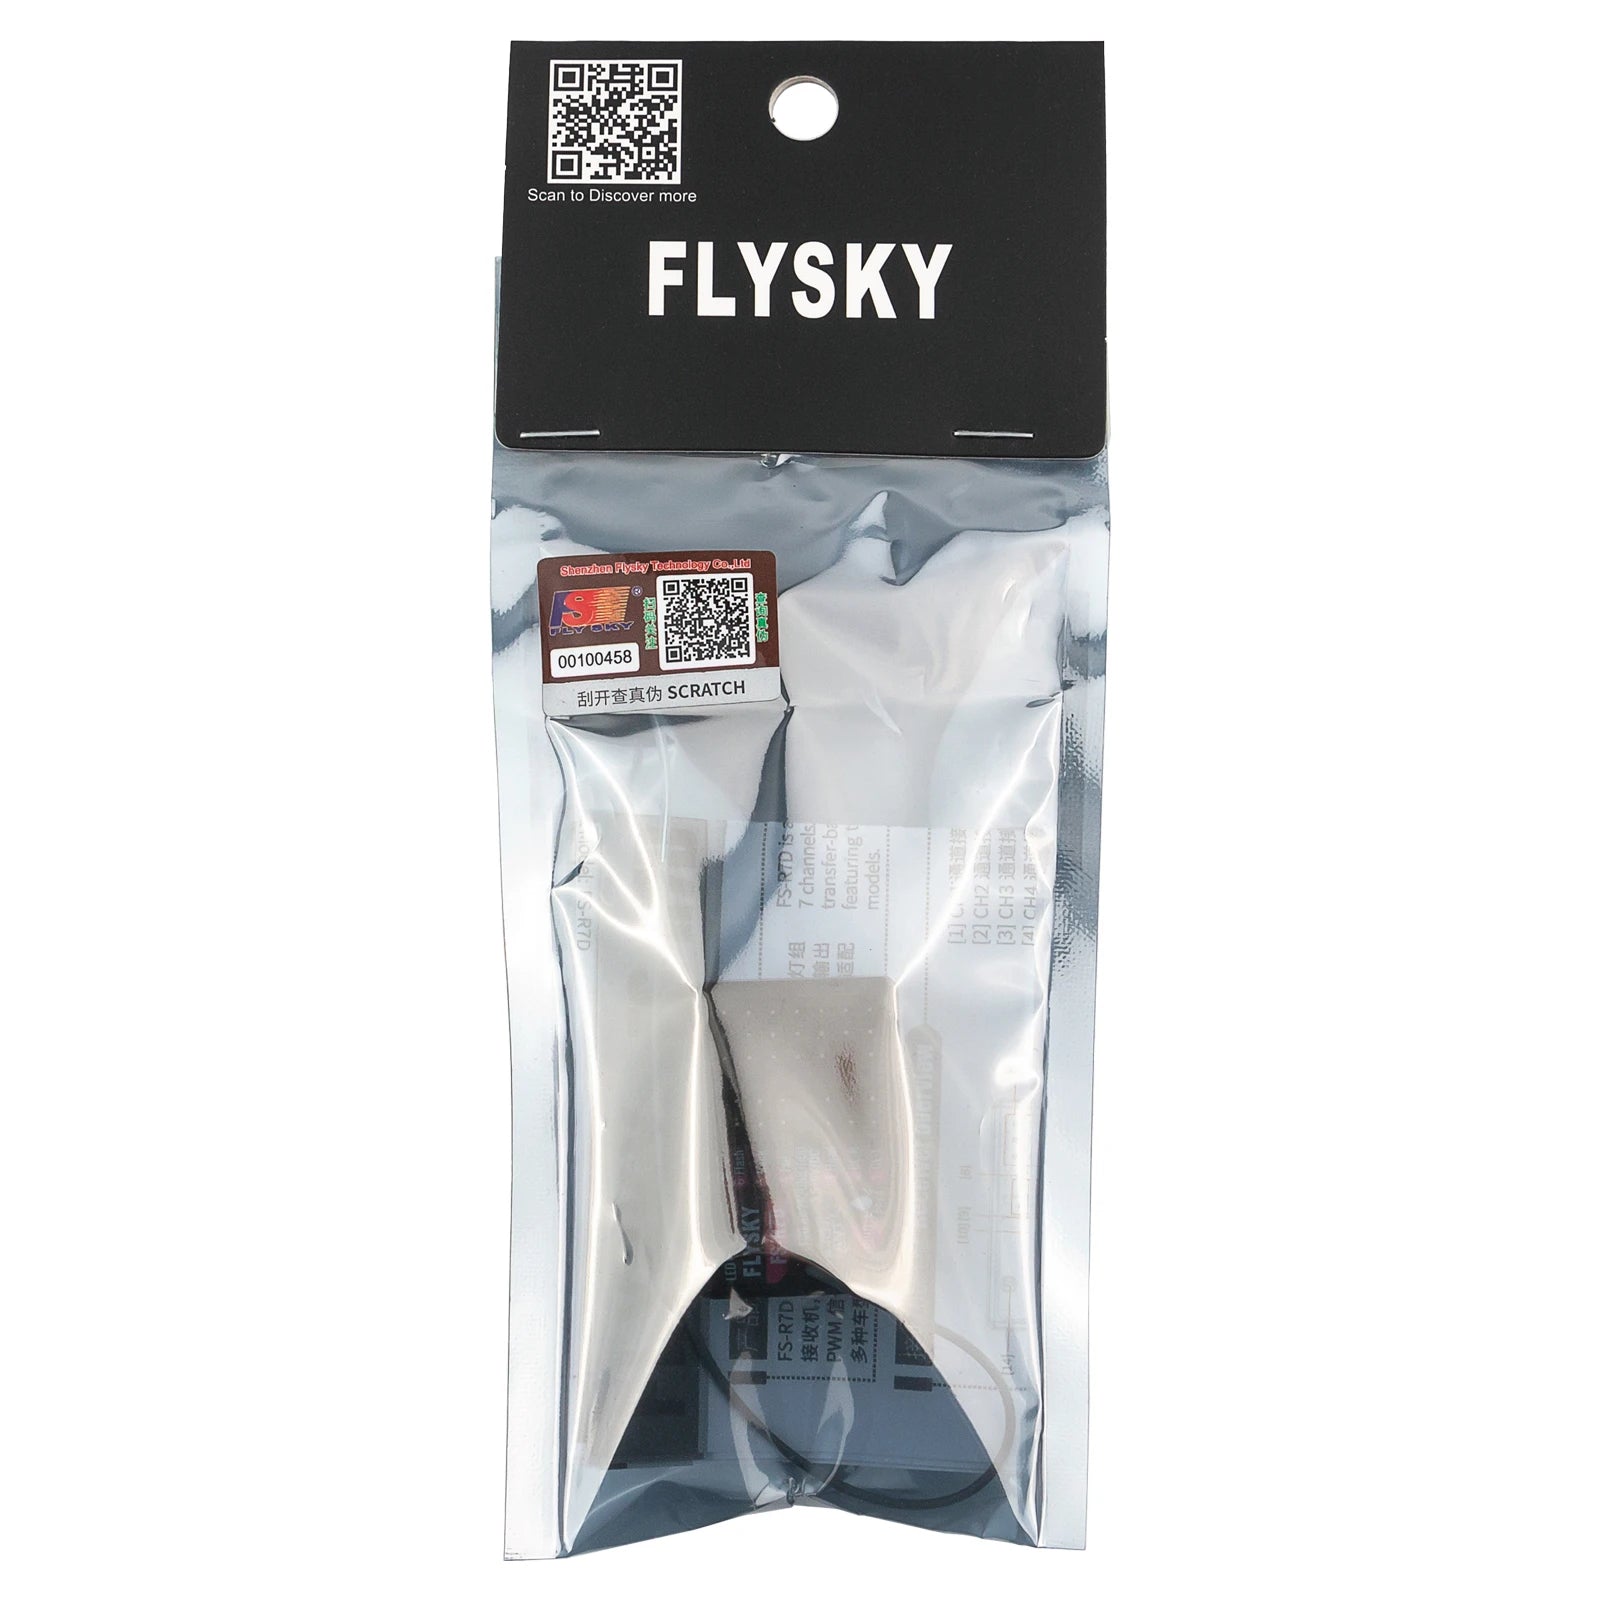 FLYSKY FS-R7D 7CH 2.4G Receiver, 2.If you are satisfied with our service, we hope you can make us feel it